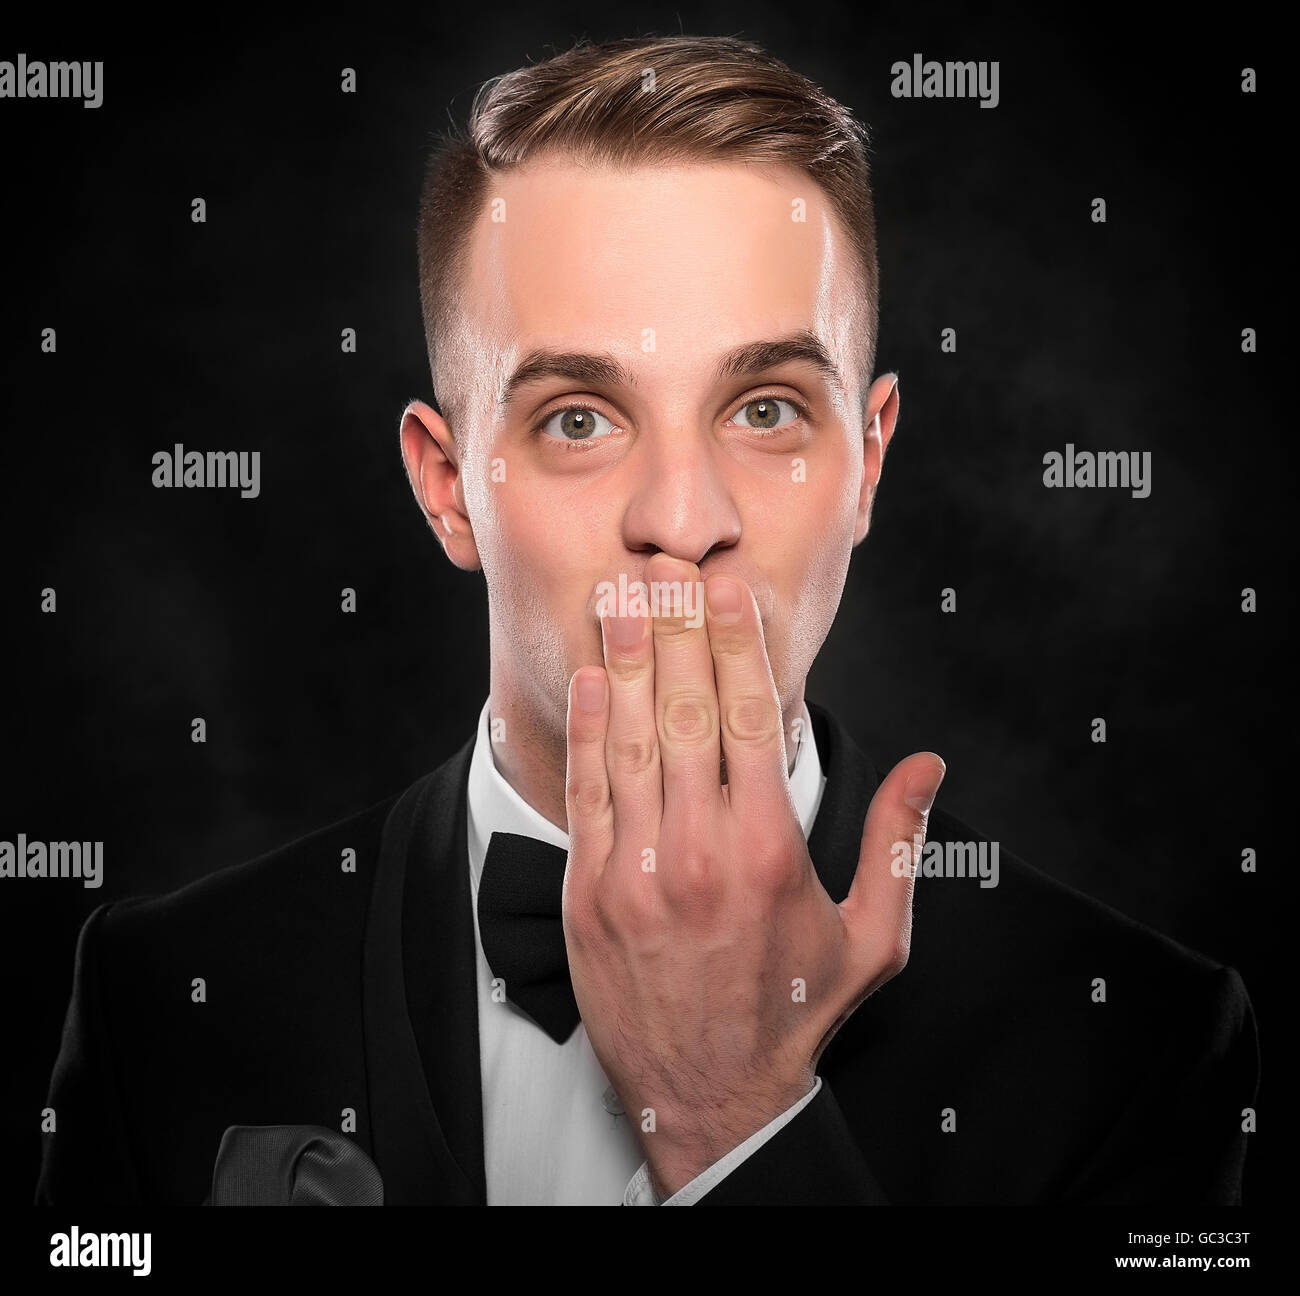 Scared man in suit hand covering mouth over dark background. Stock Photo